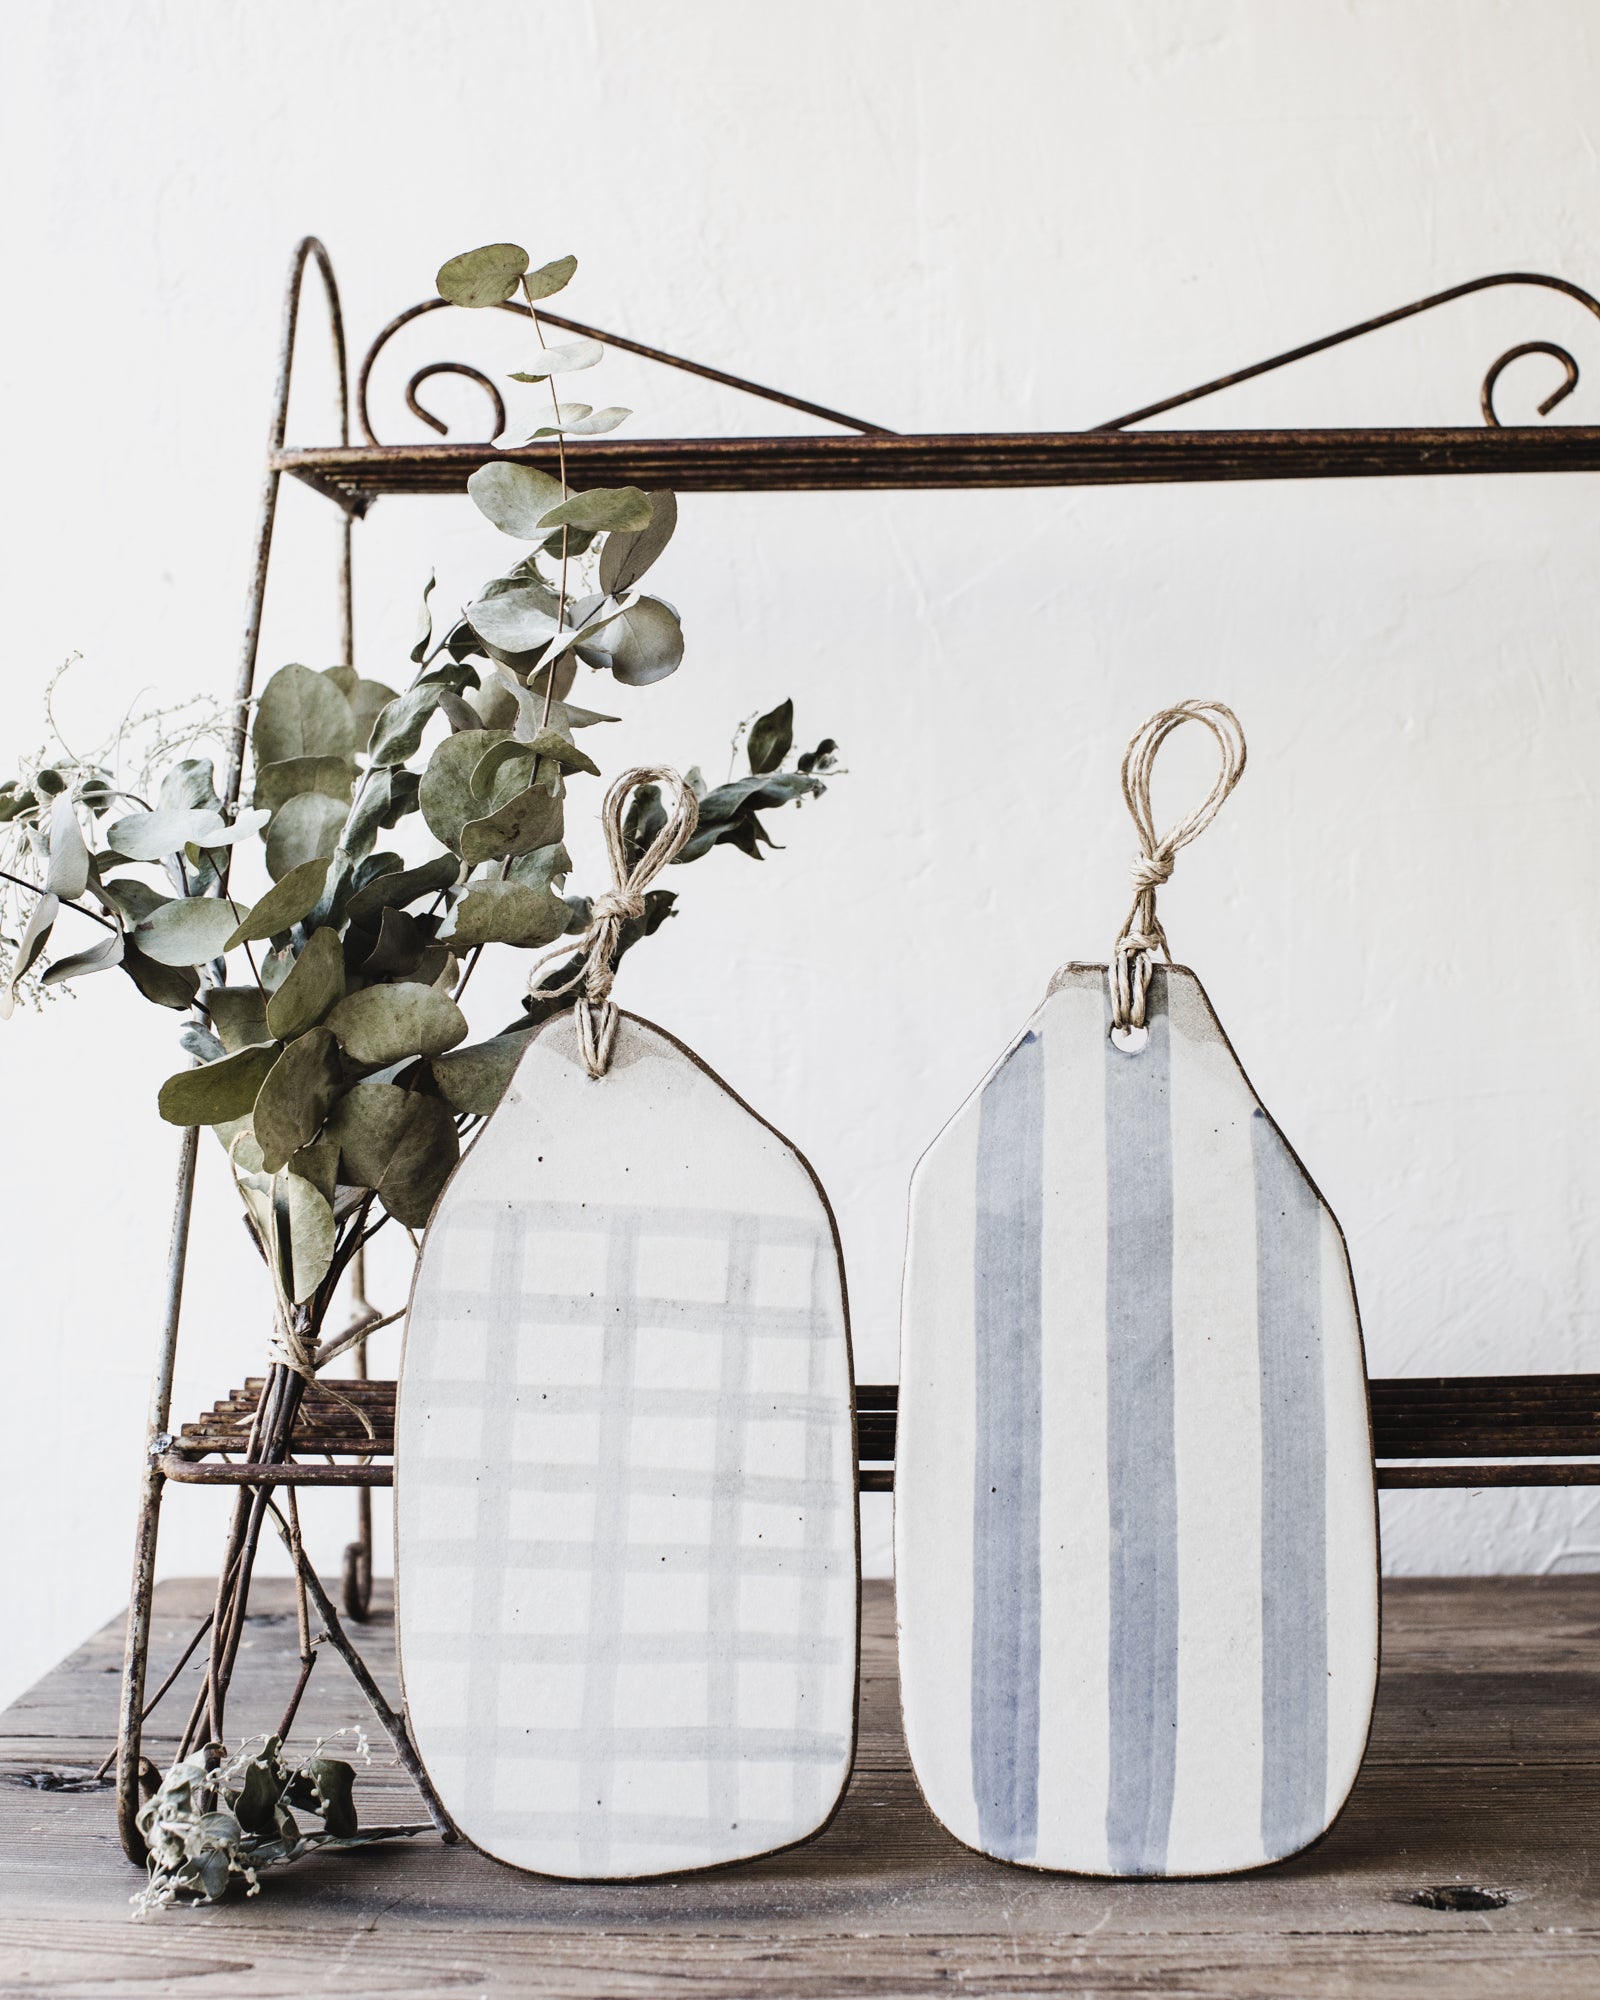 Rustic lines and grid pattern ceramic cheeseboards by clay beehive